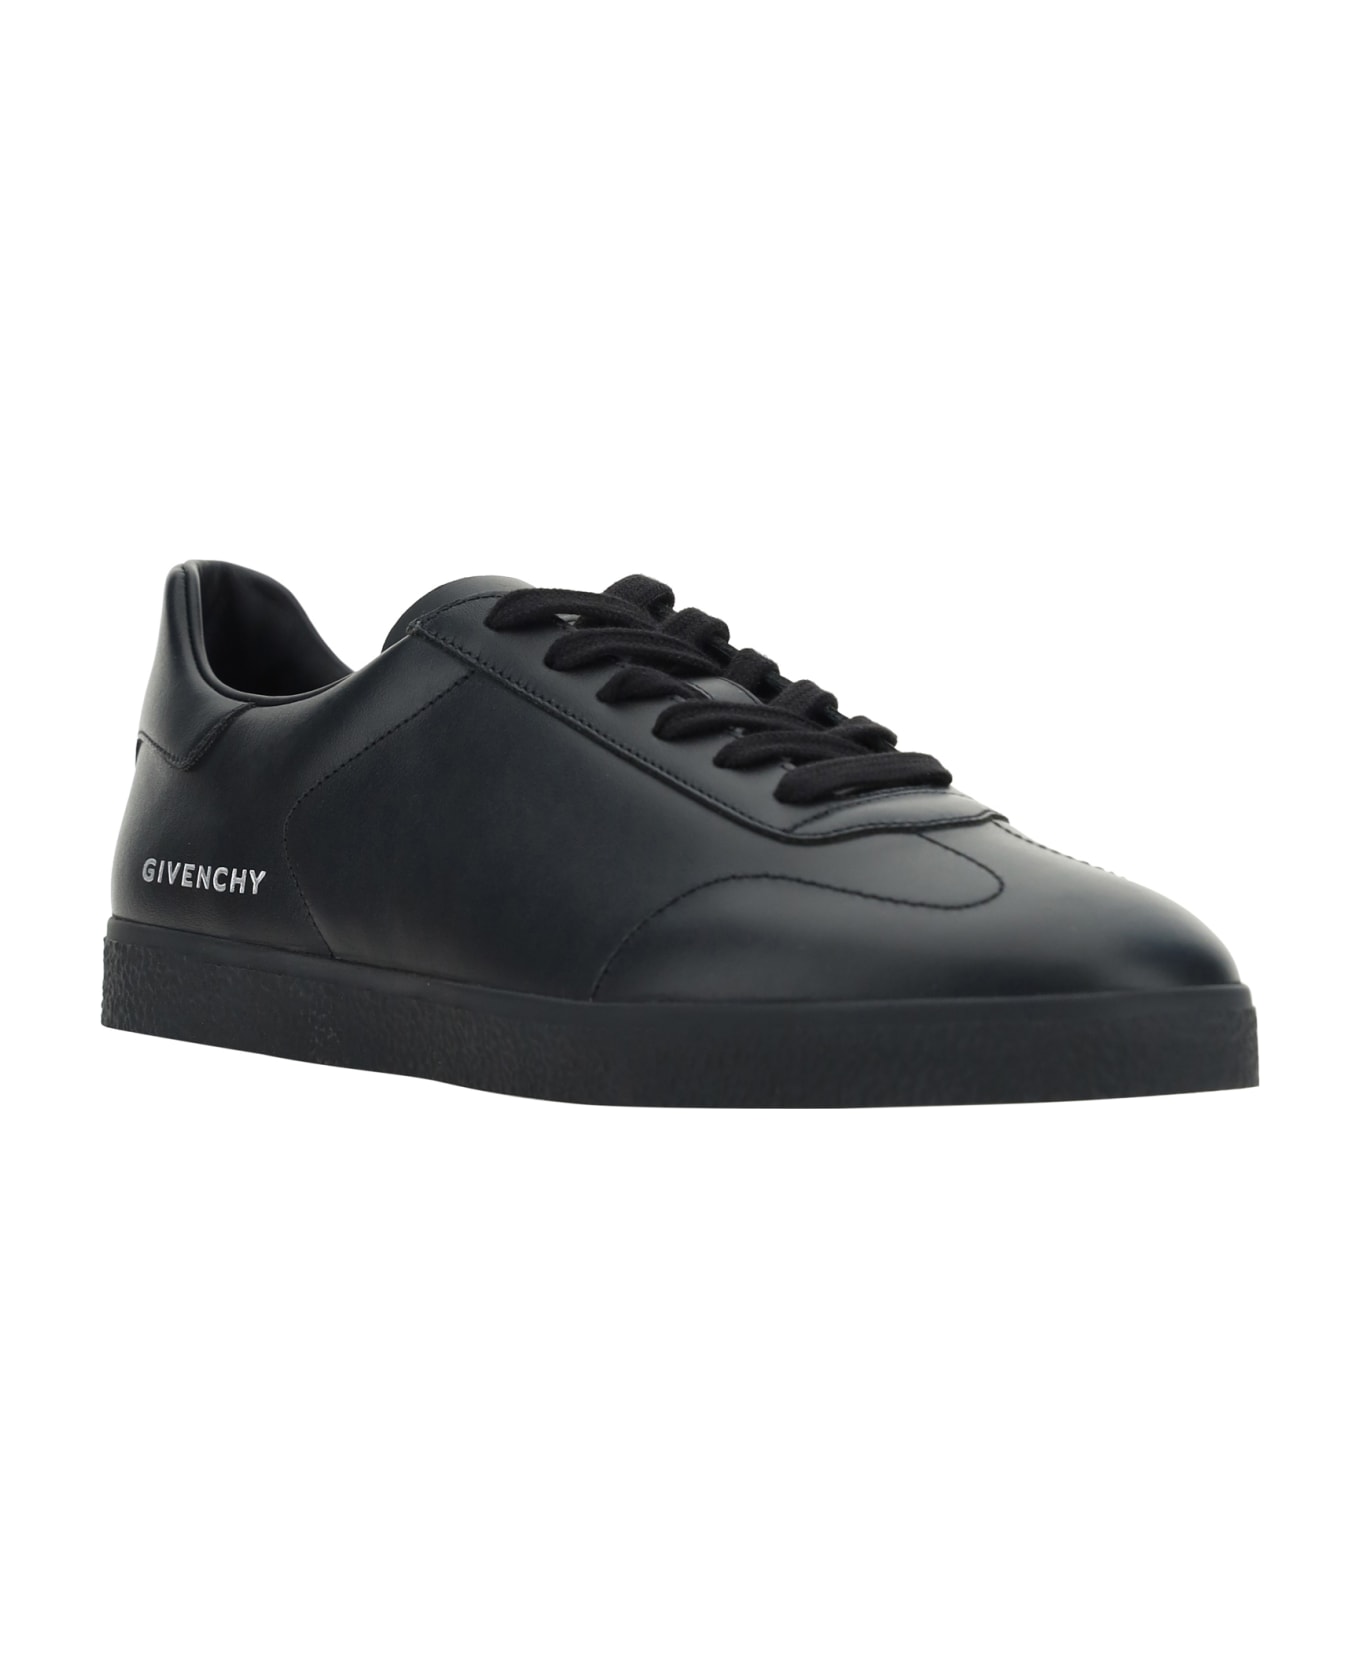 Givenchy Town Leather Sneakers - Black スニーカー